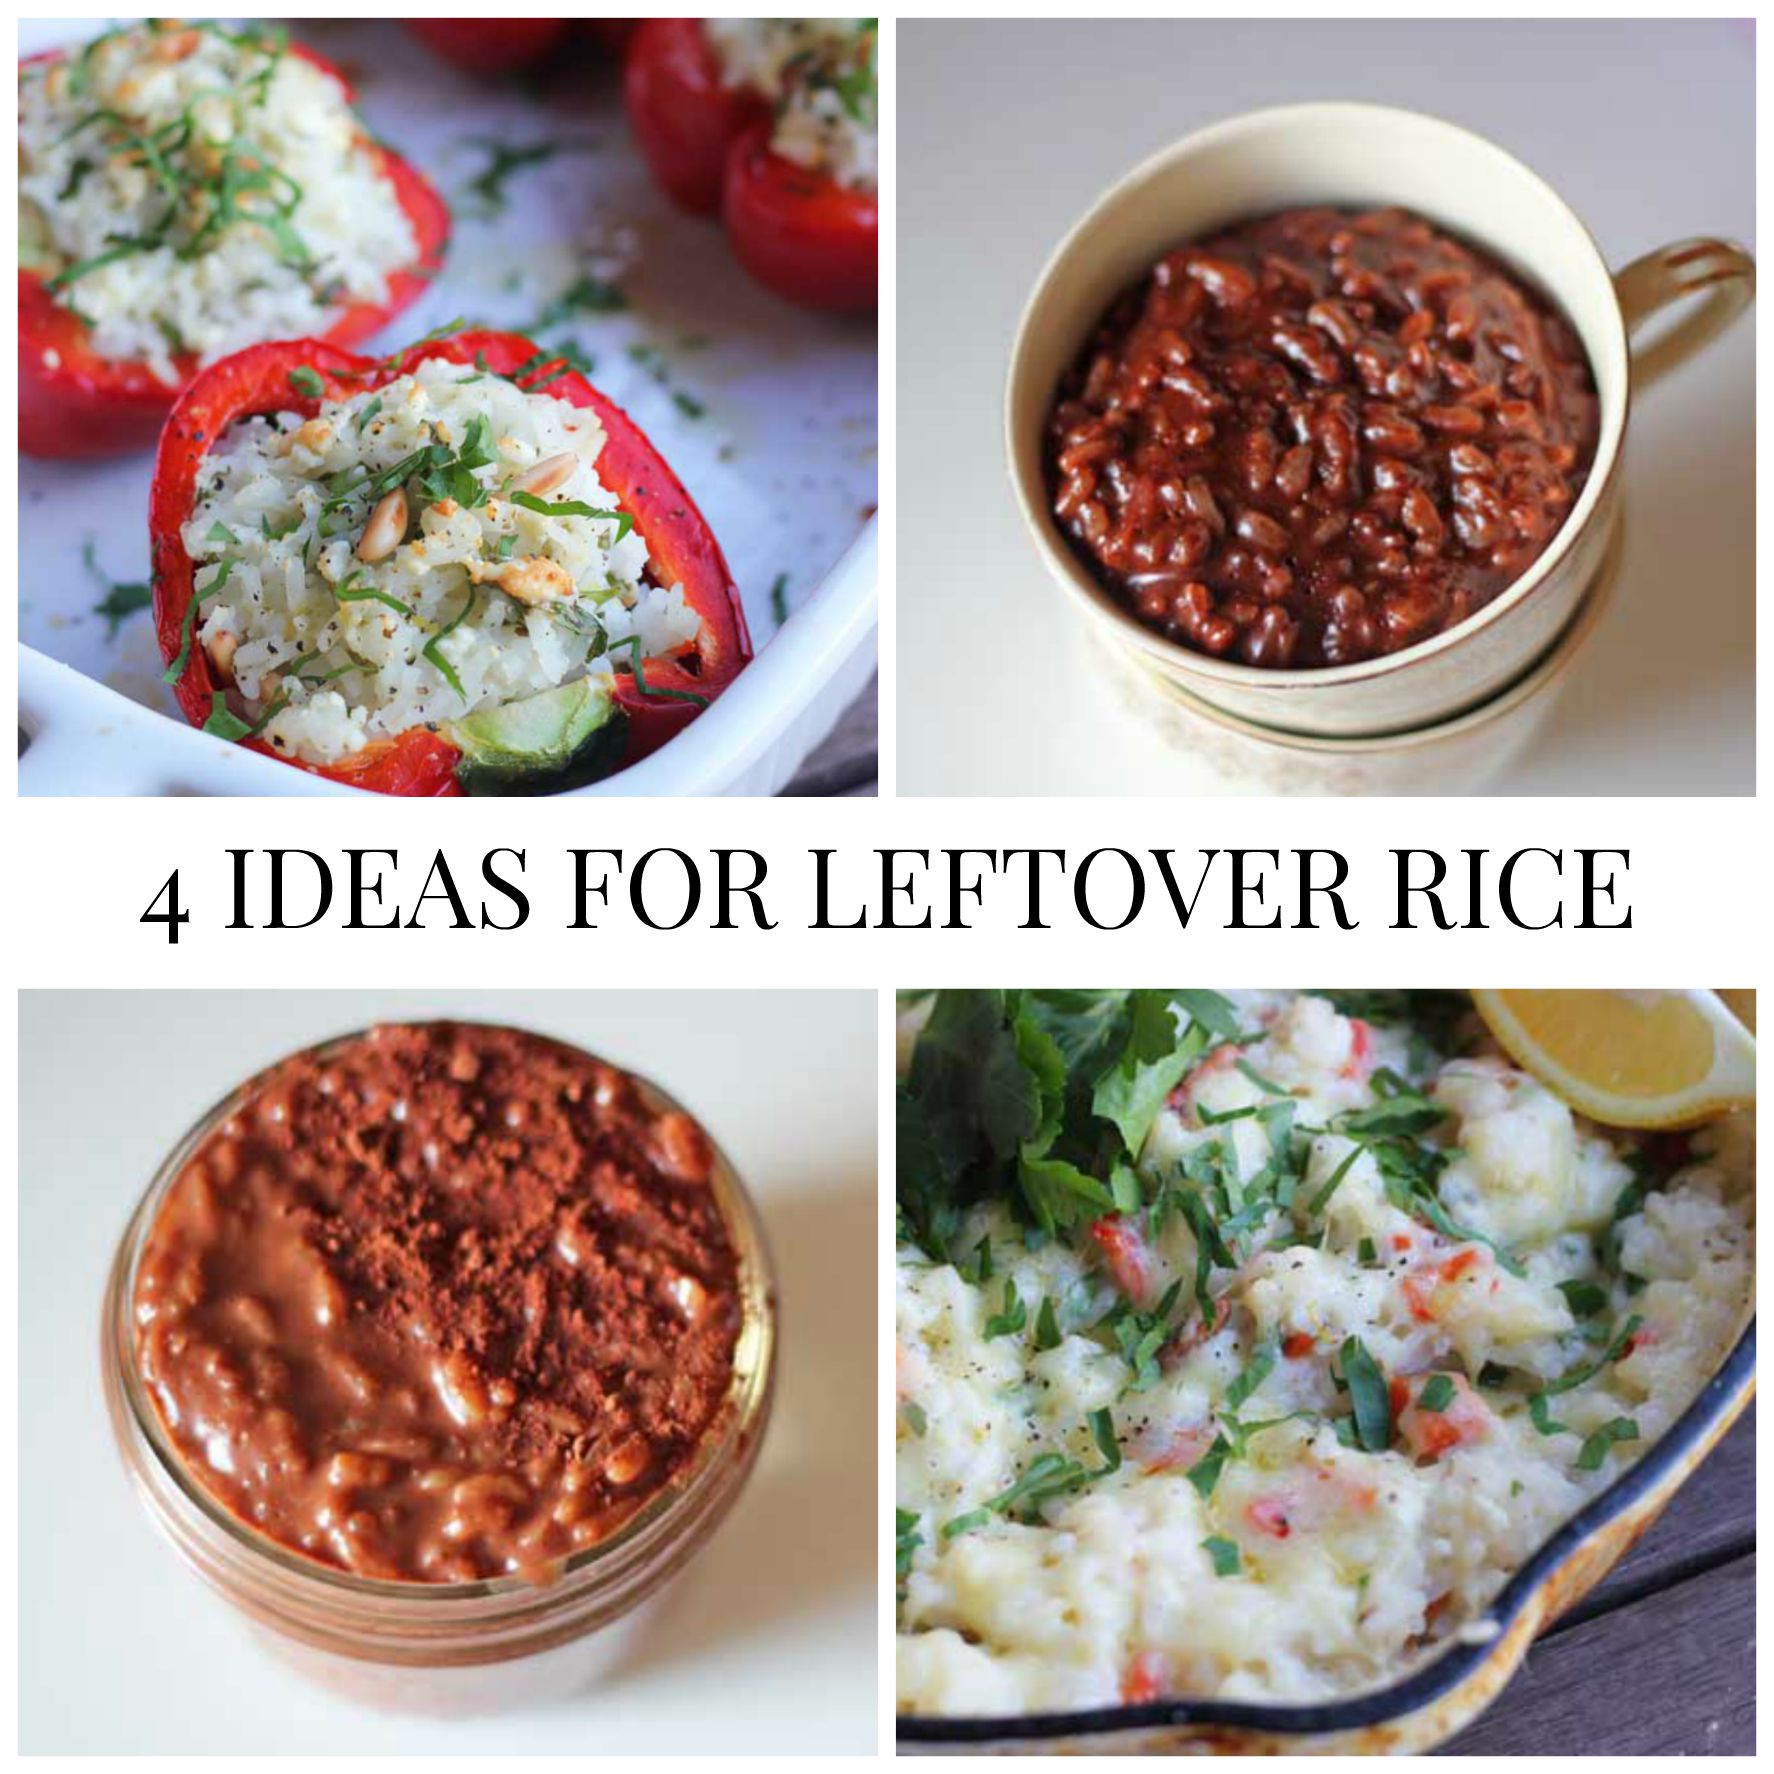 Got leftover rice? I've got 4 ideas to turn that pot of boring into deliciousness!